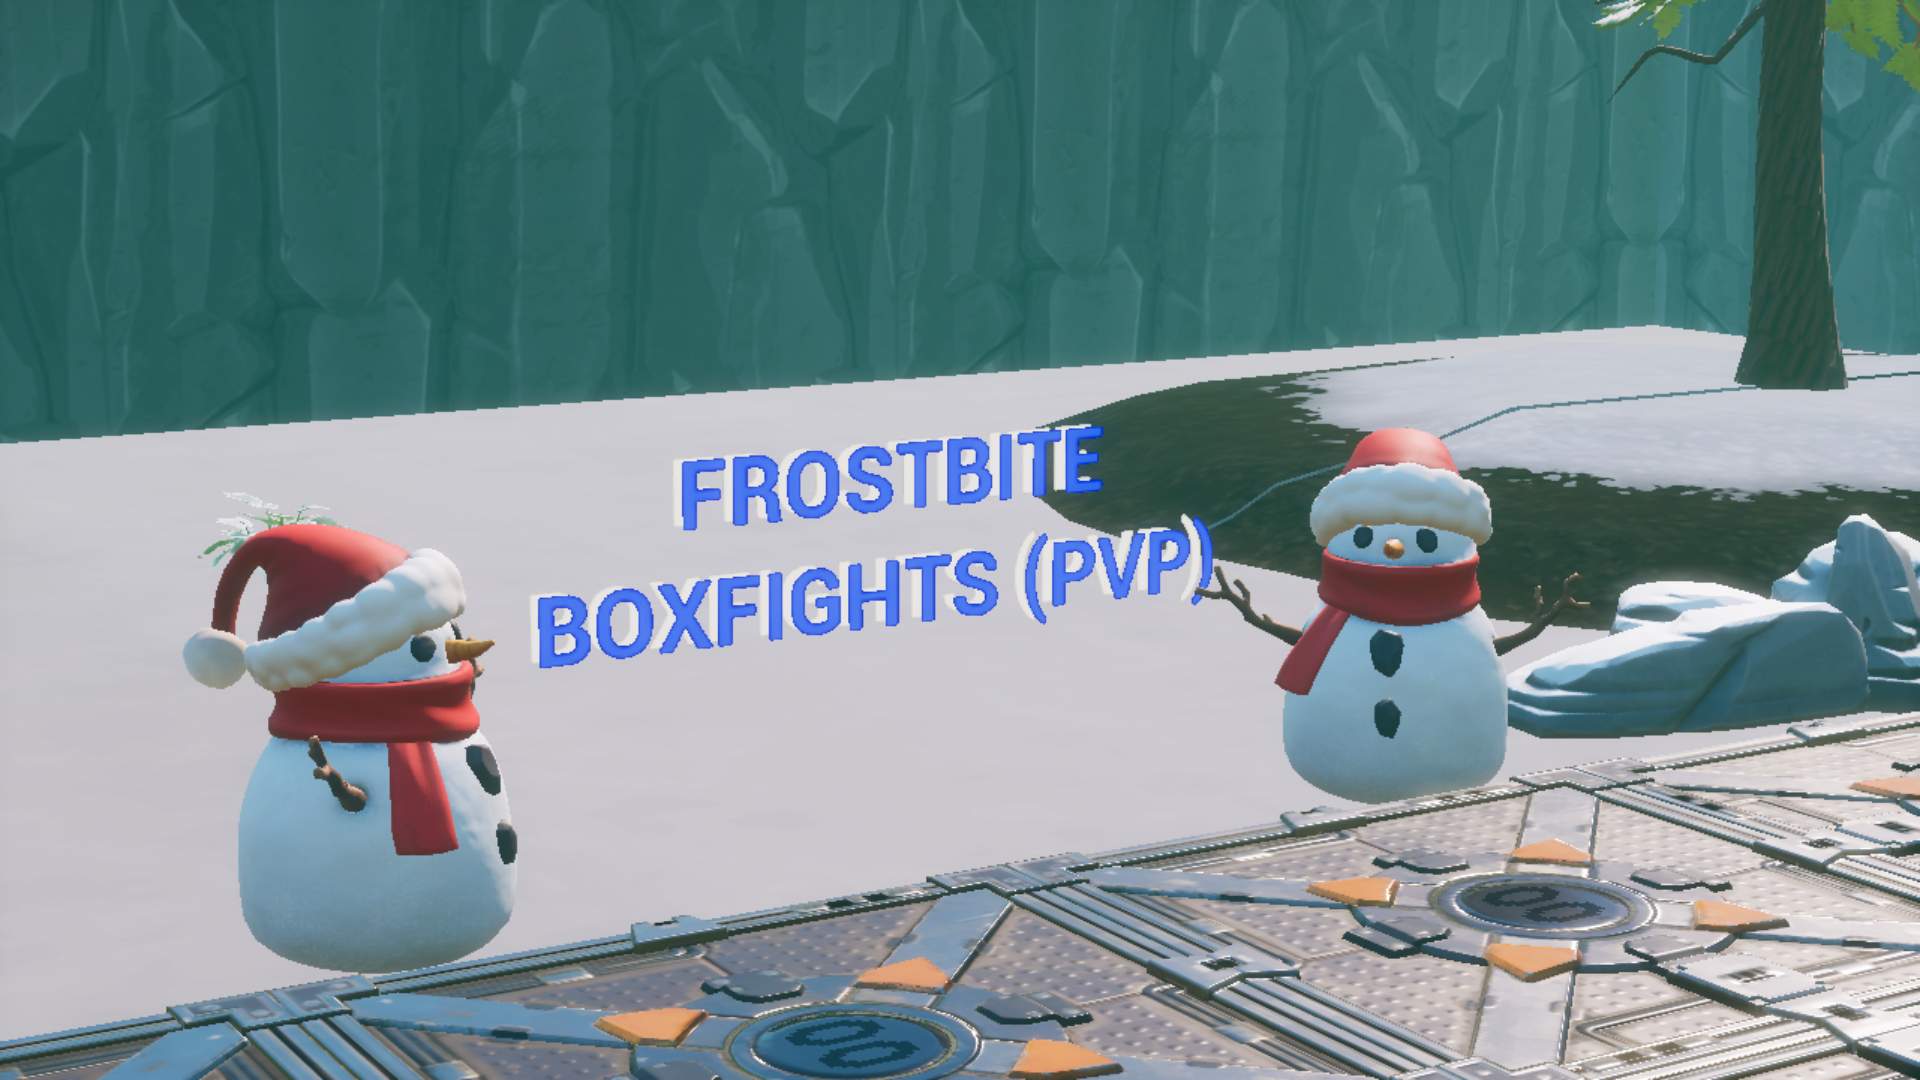 FROSTBITE BOX FIGHTS (PVP) image 3